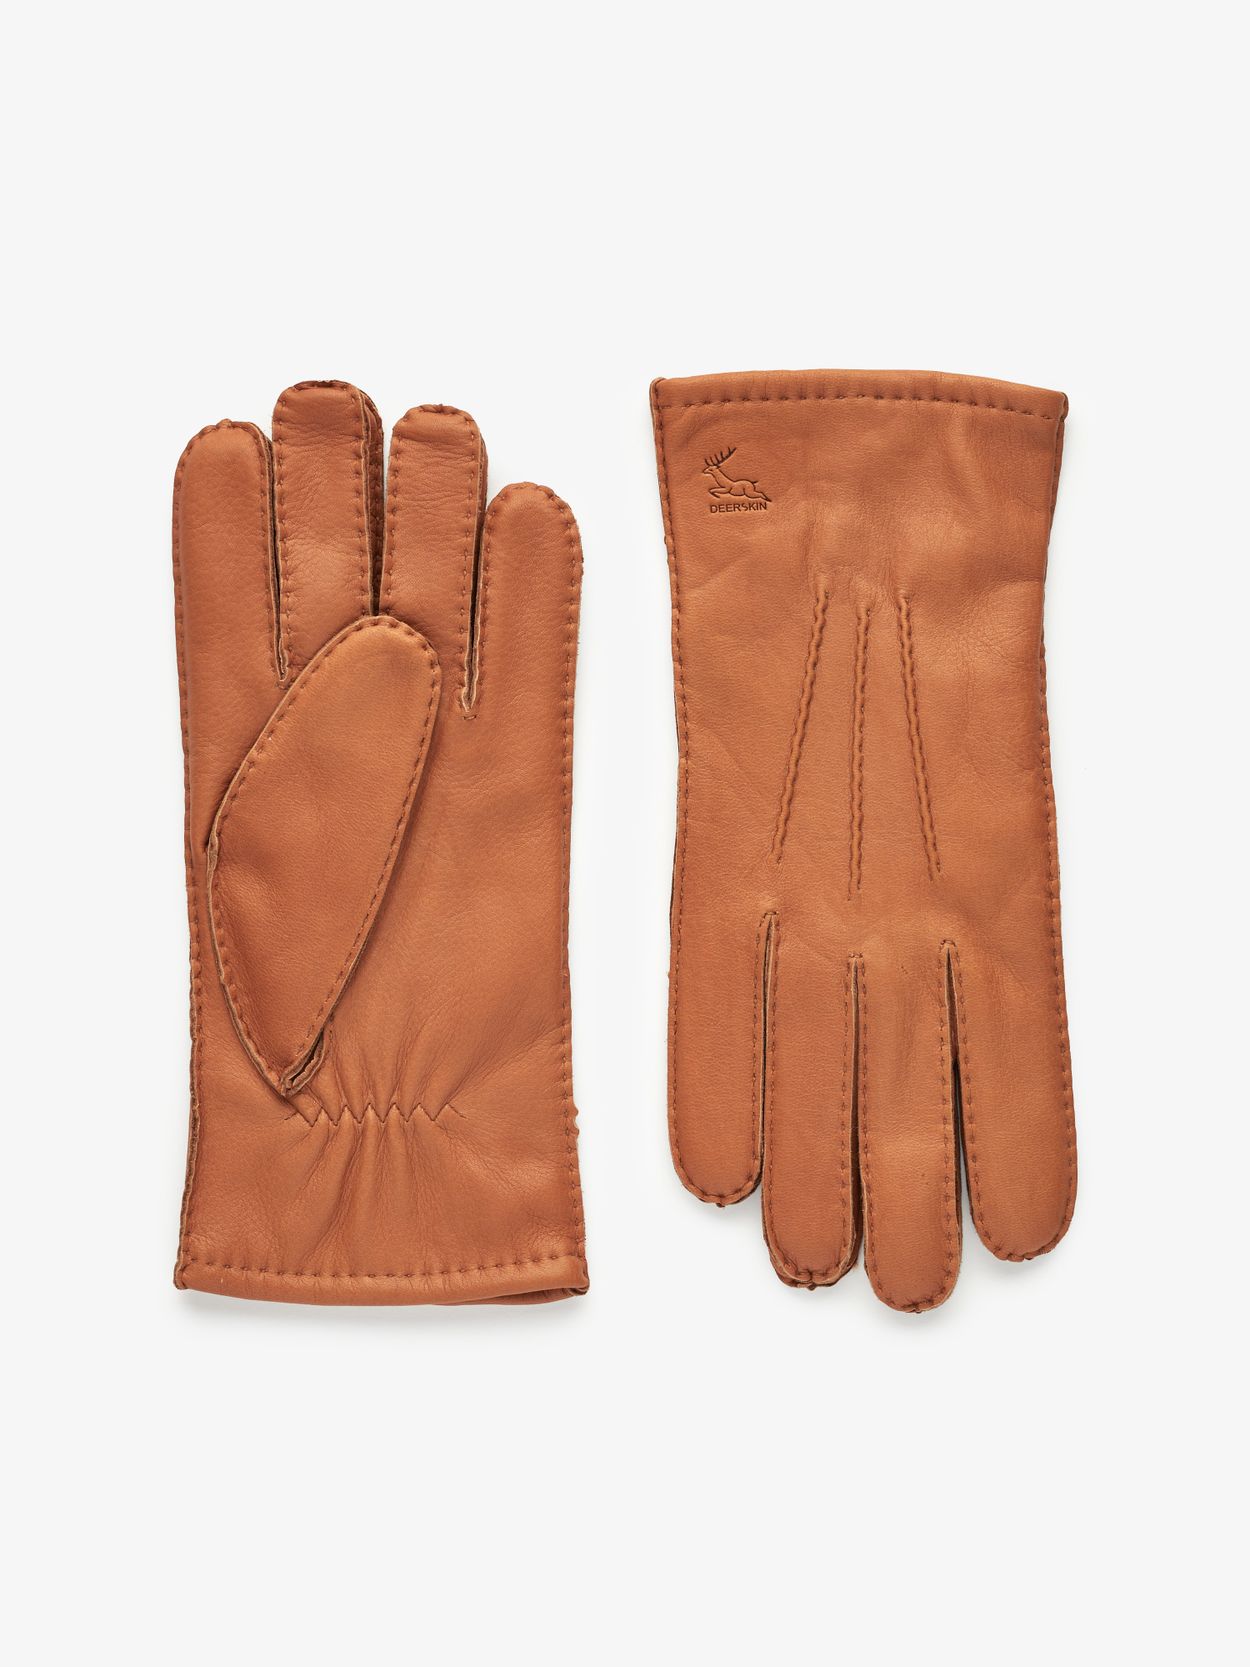 Black Leather Gloves Airolo